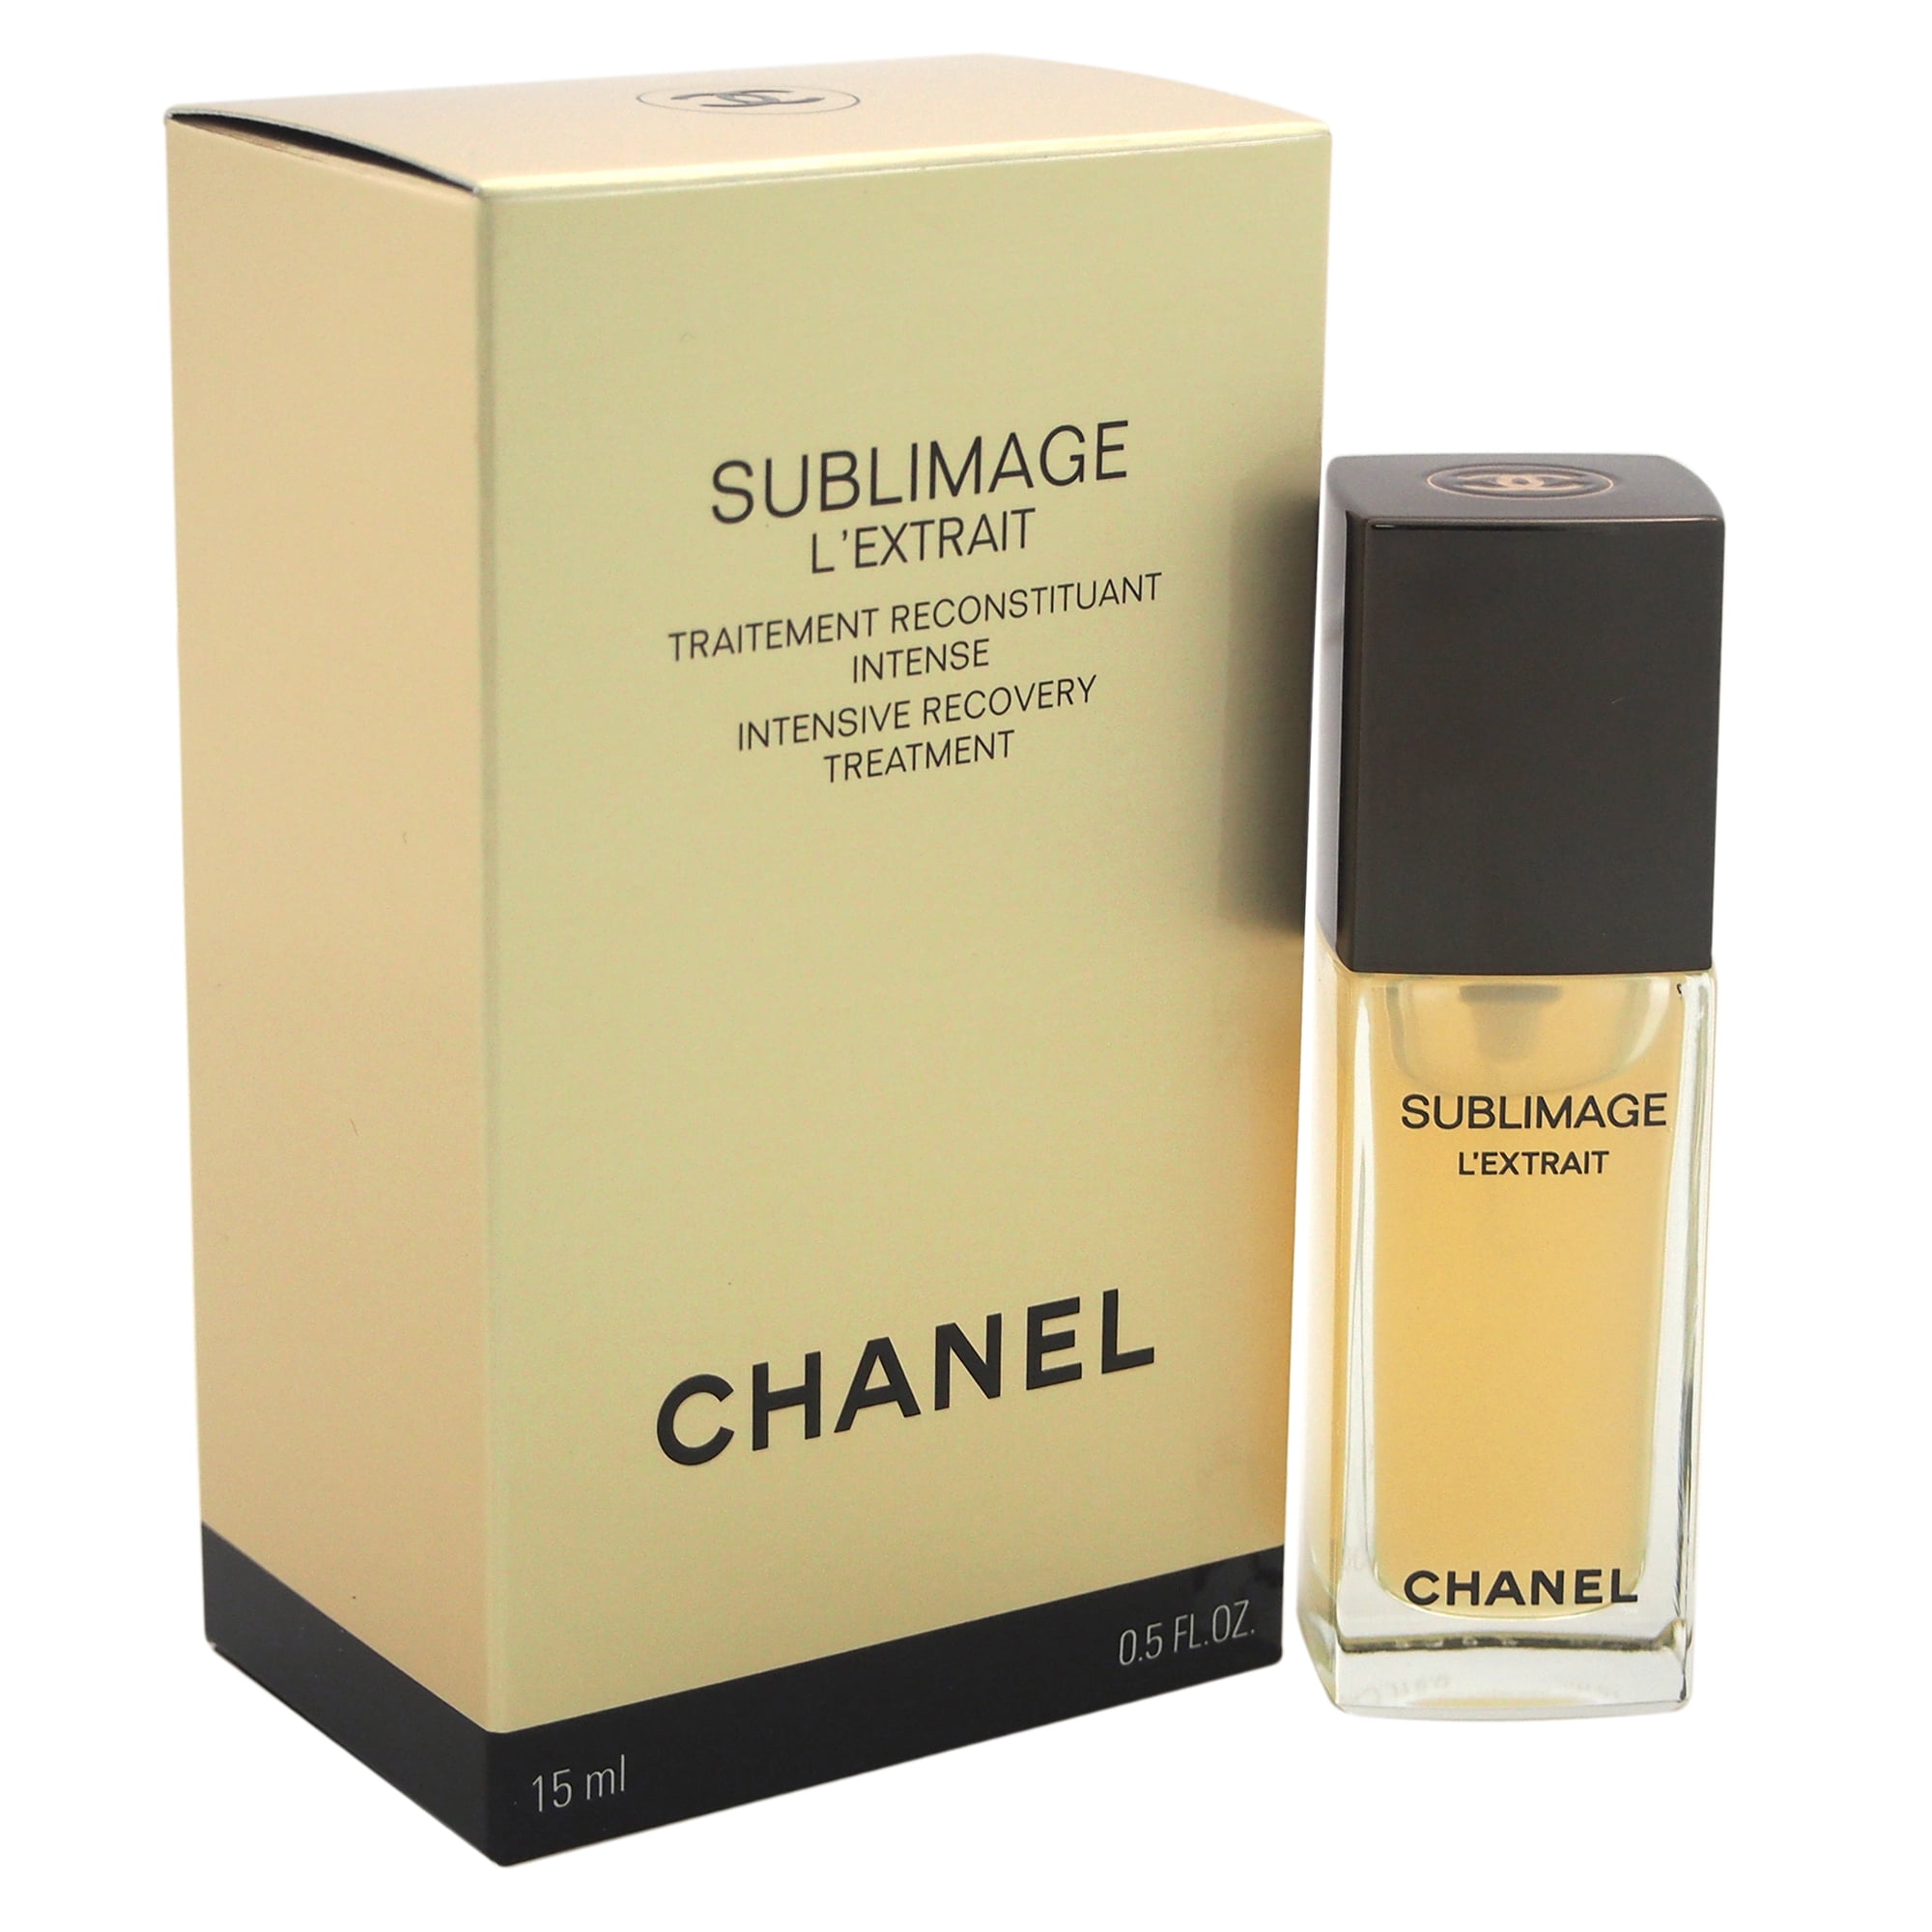 Sublimage LExtrait Intensive Recovery Treatment by Chanel for Women - 0.5  oz Treatment